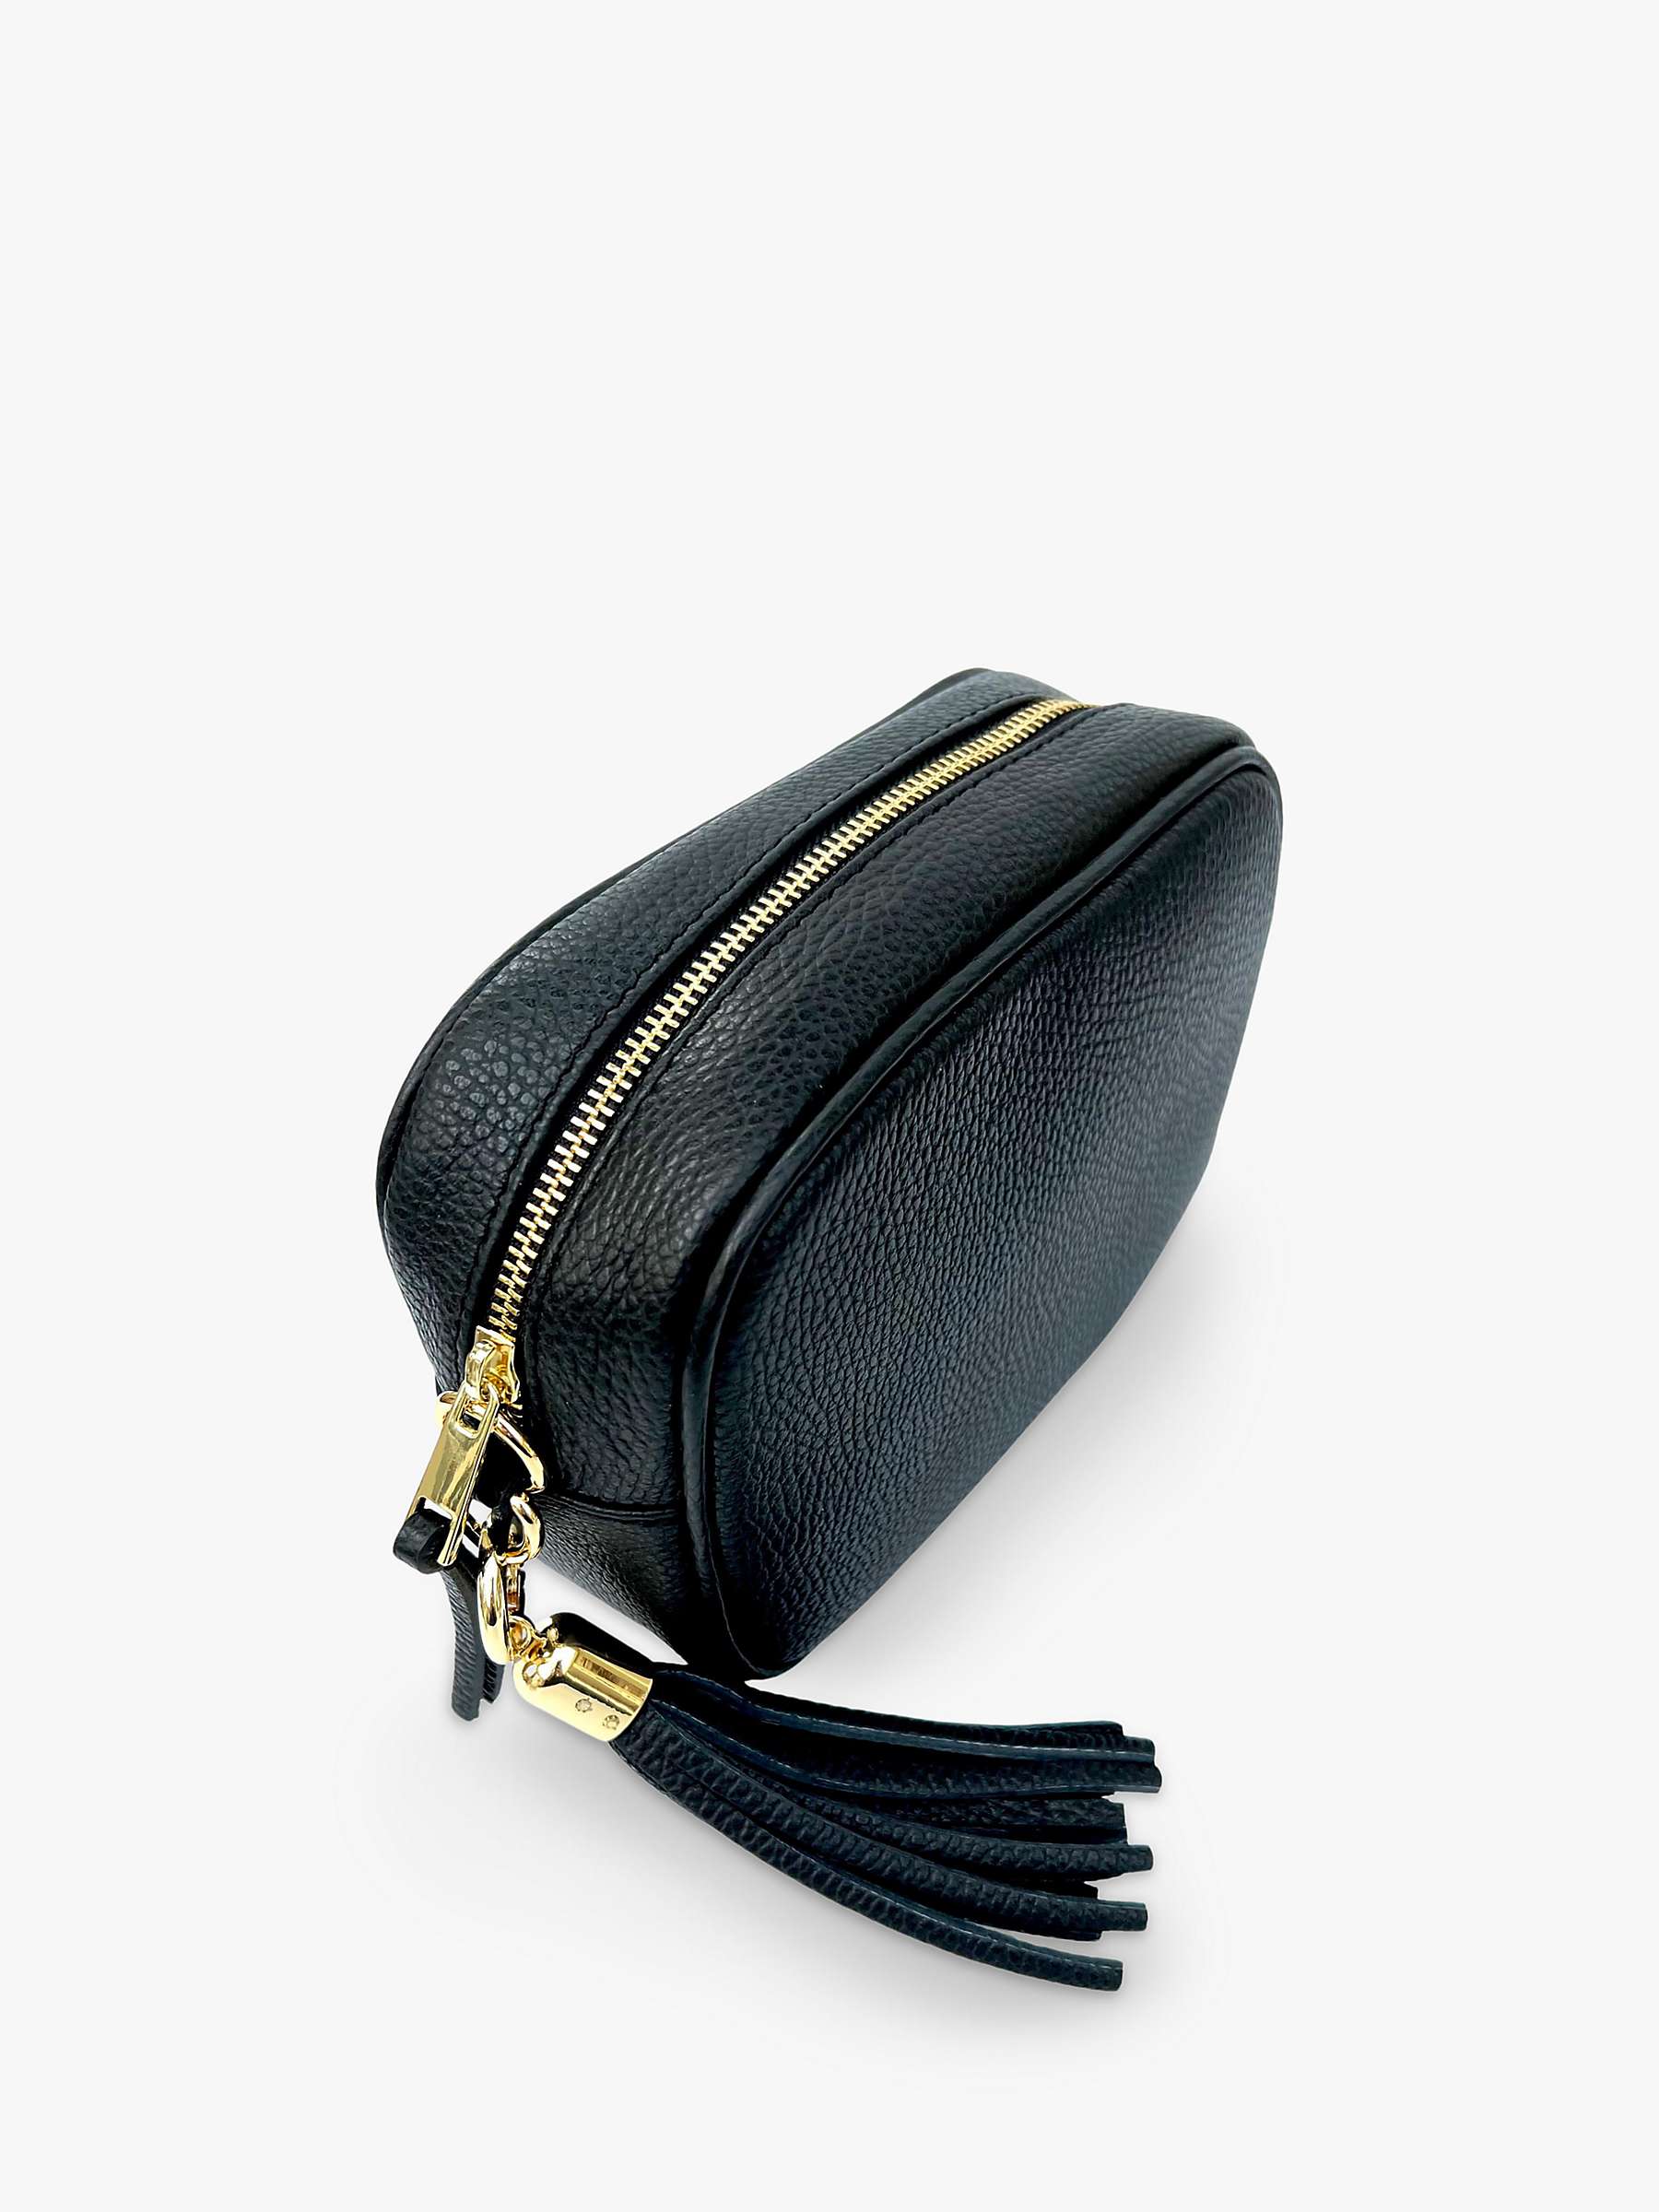 Buy Apatchy Leather & Canvas Stray Crossbody Bag, Black Online at johnlewis.com